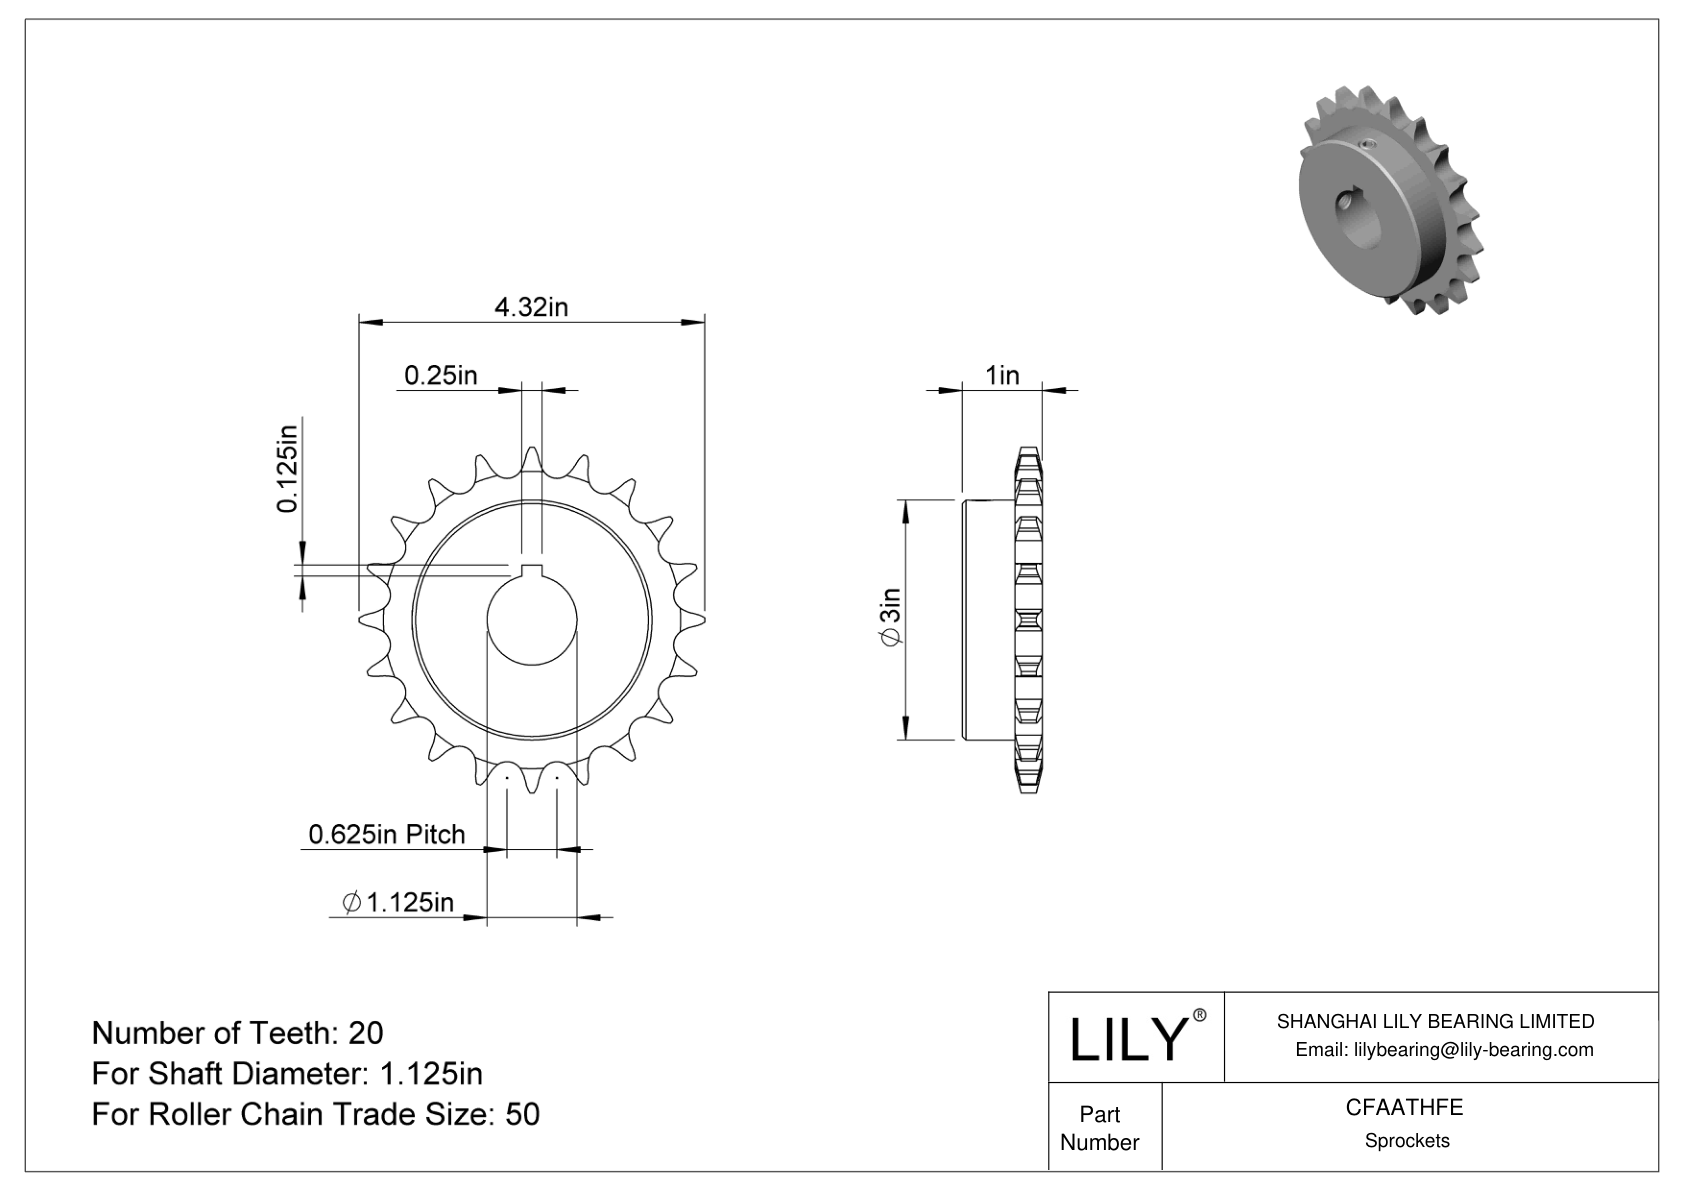 CFAATHFE Wear-Resistant Sprockets for ANSI Roller Chain cad drawing